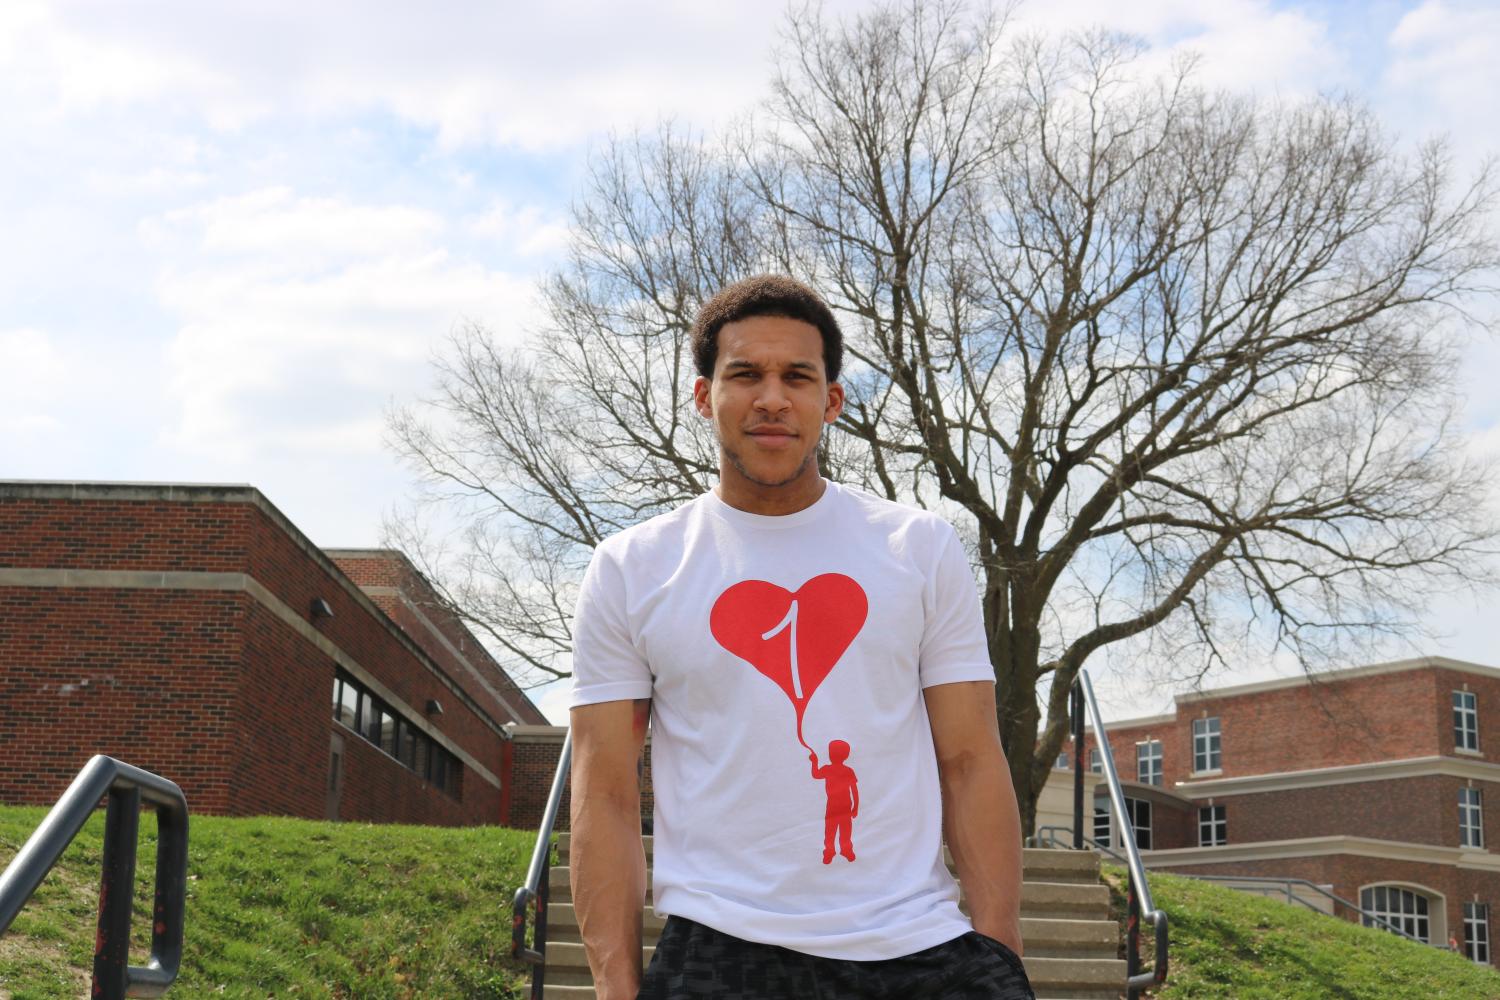 Former Little Hawk Creates Brand to Uplift Youth